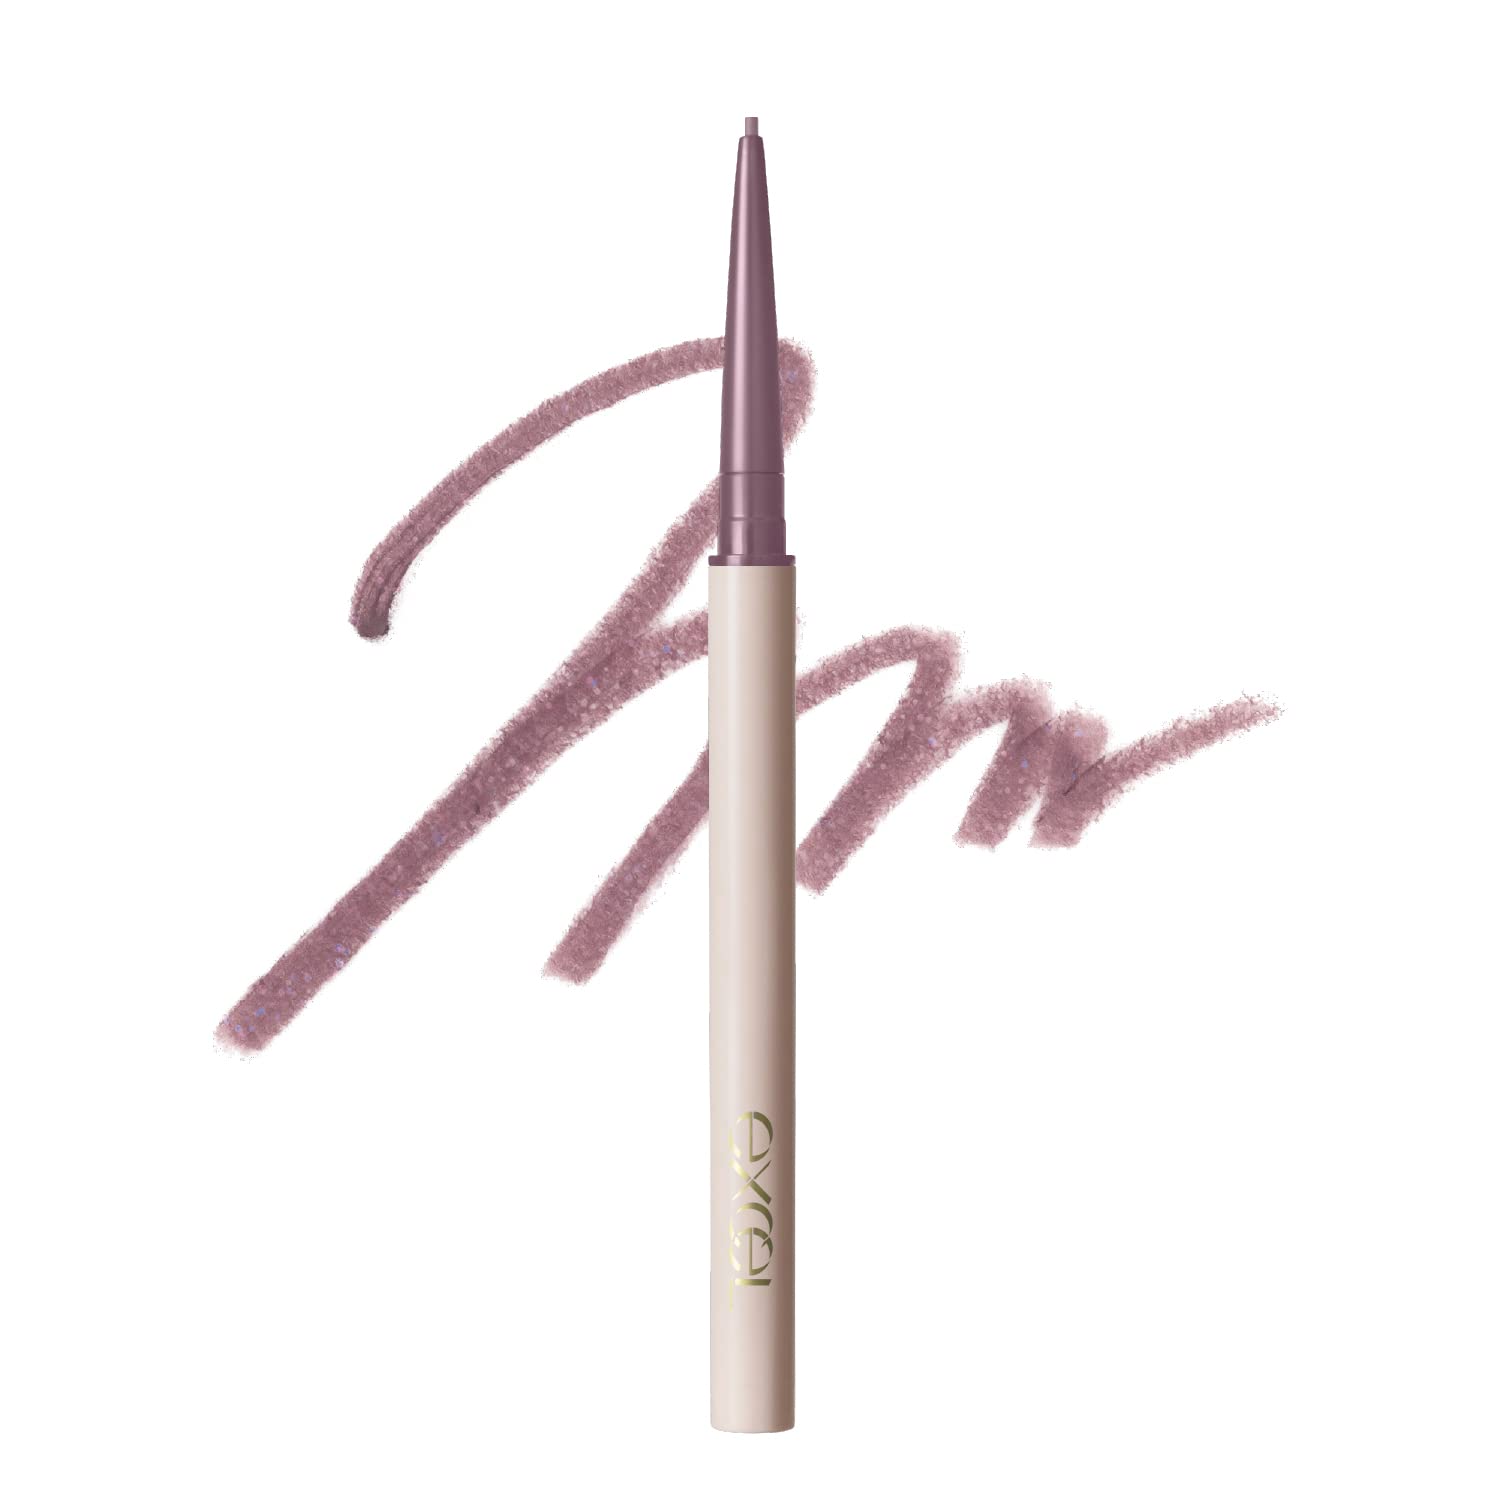 Excel Nuance Thrilling Mauve Full Pencil Liner NP06 - High Quality Makeup